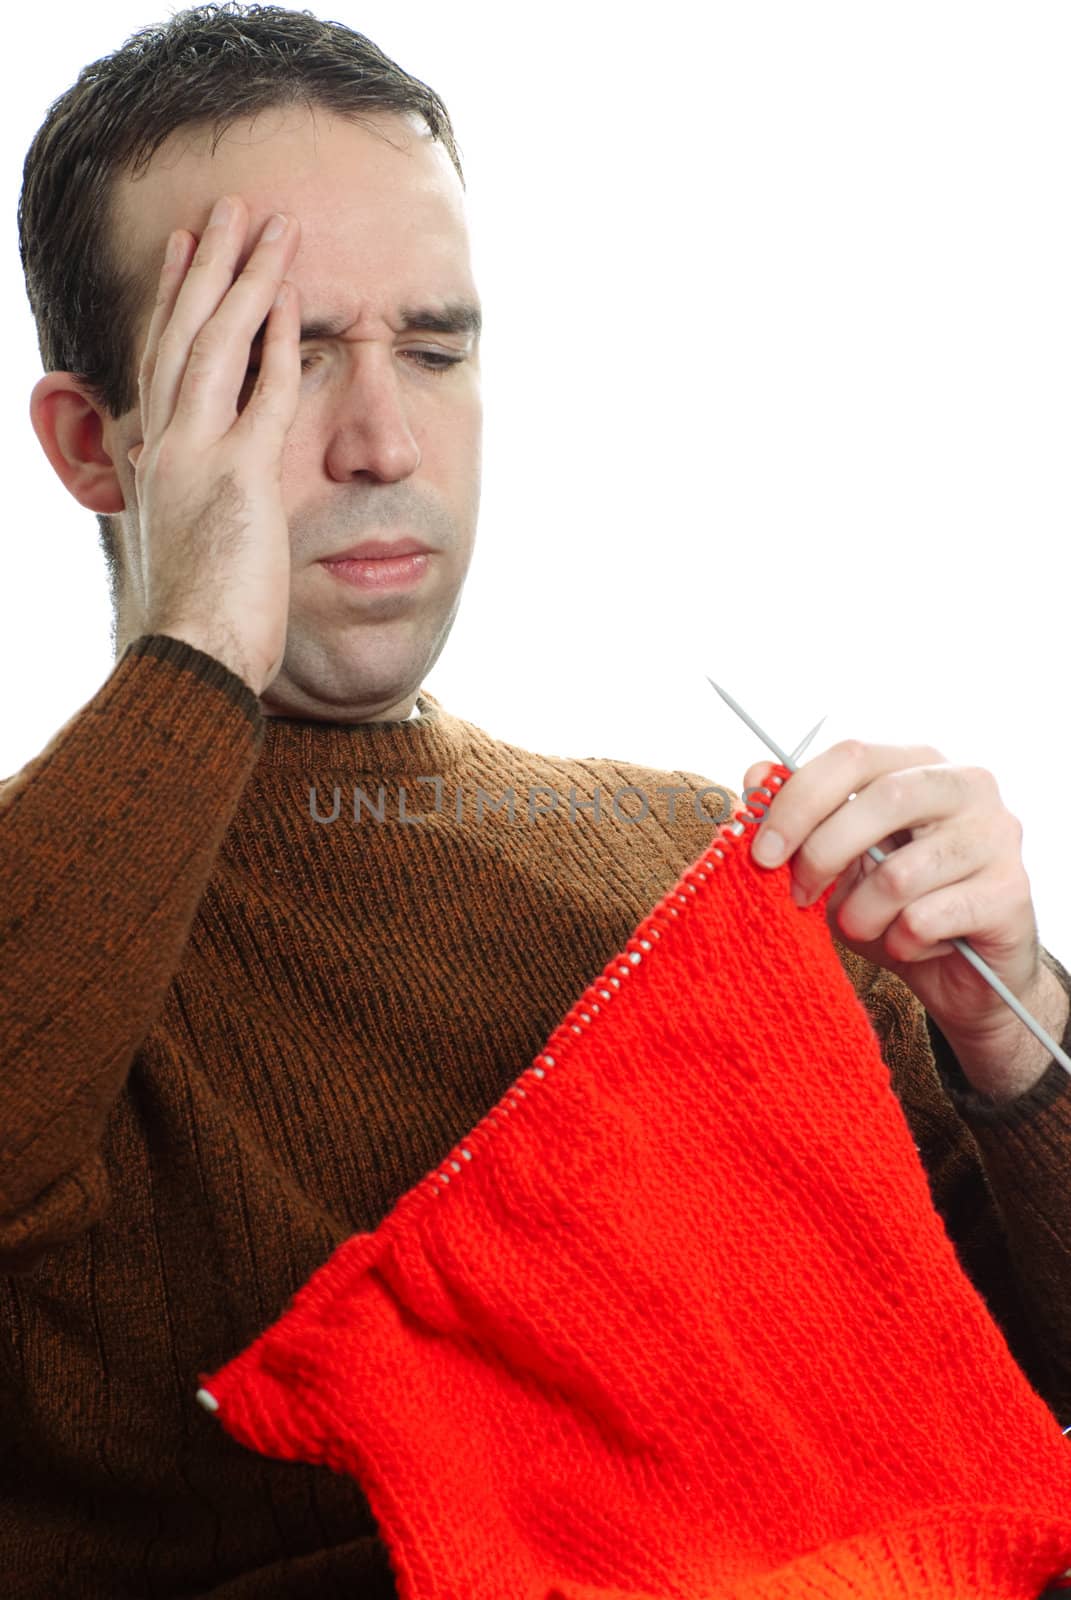 A young man is getting frustrated at his knitting, isolated against a white background